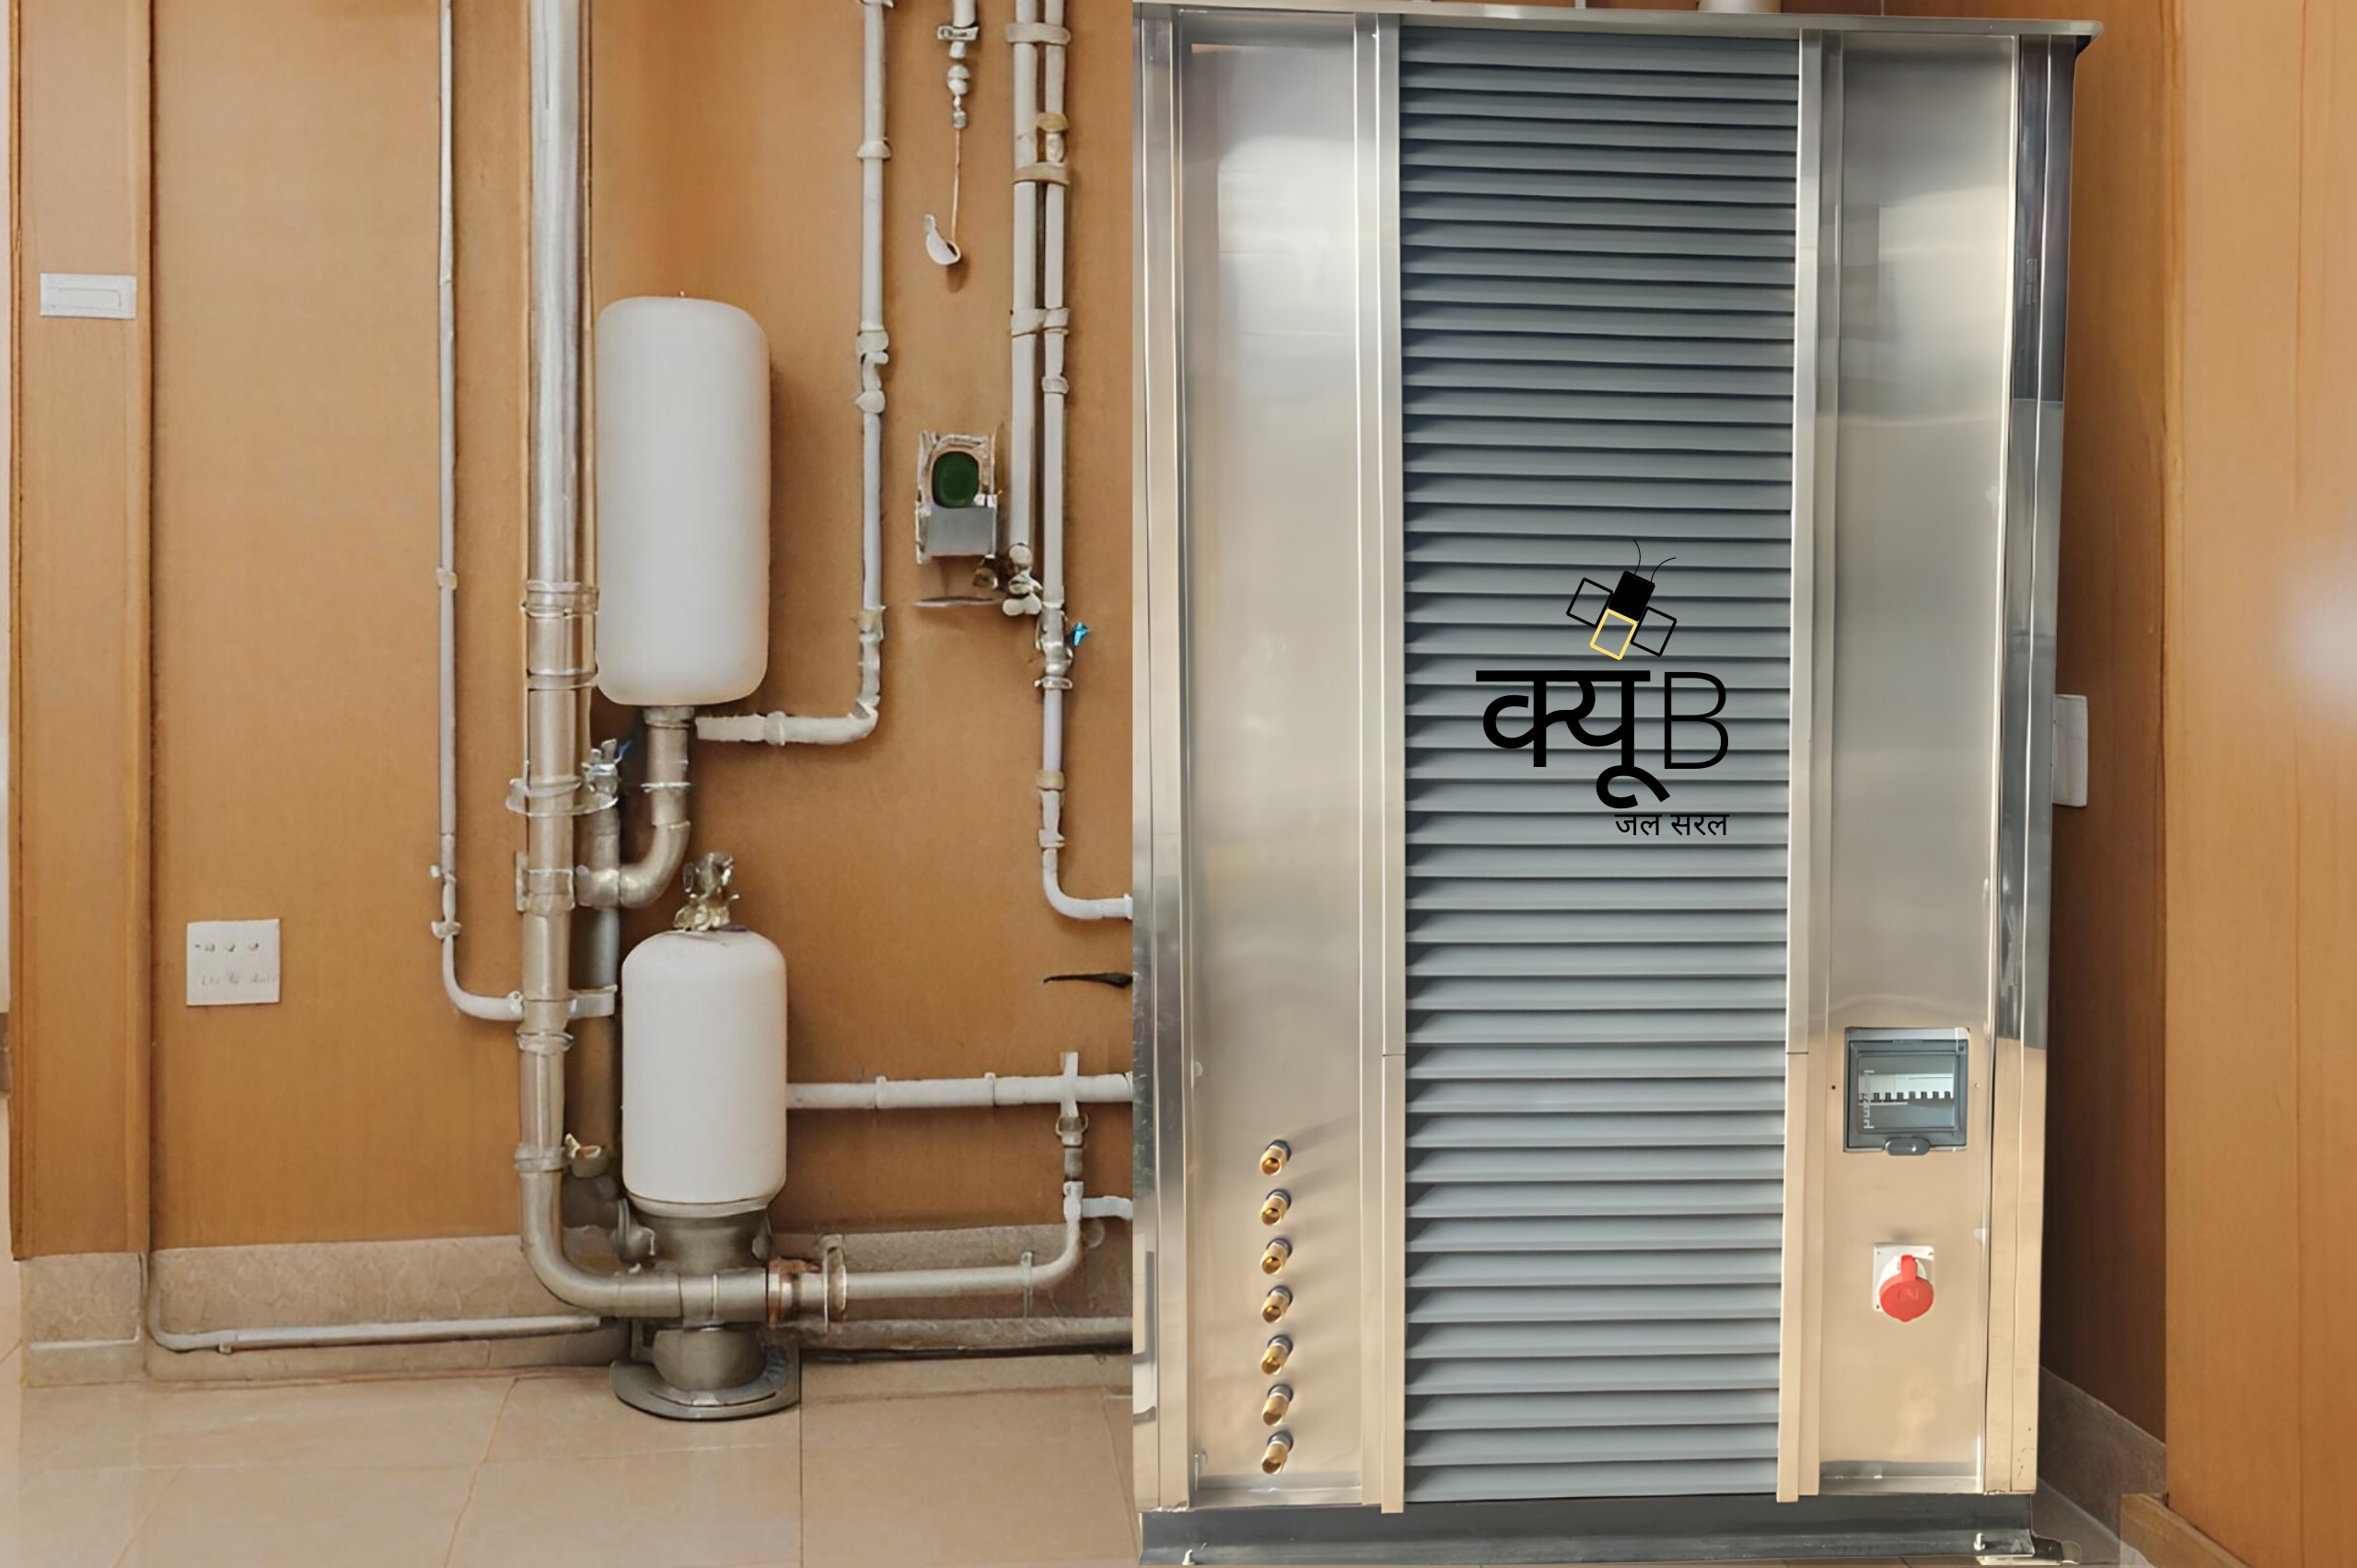 Smart Plumbing Systems Revolutionizing Efficiency and Sustainability for Buildings